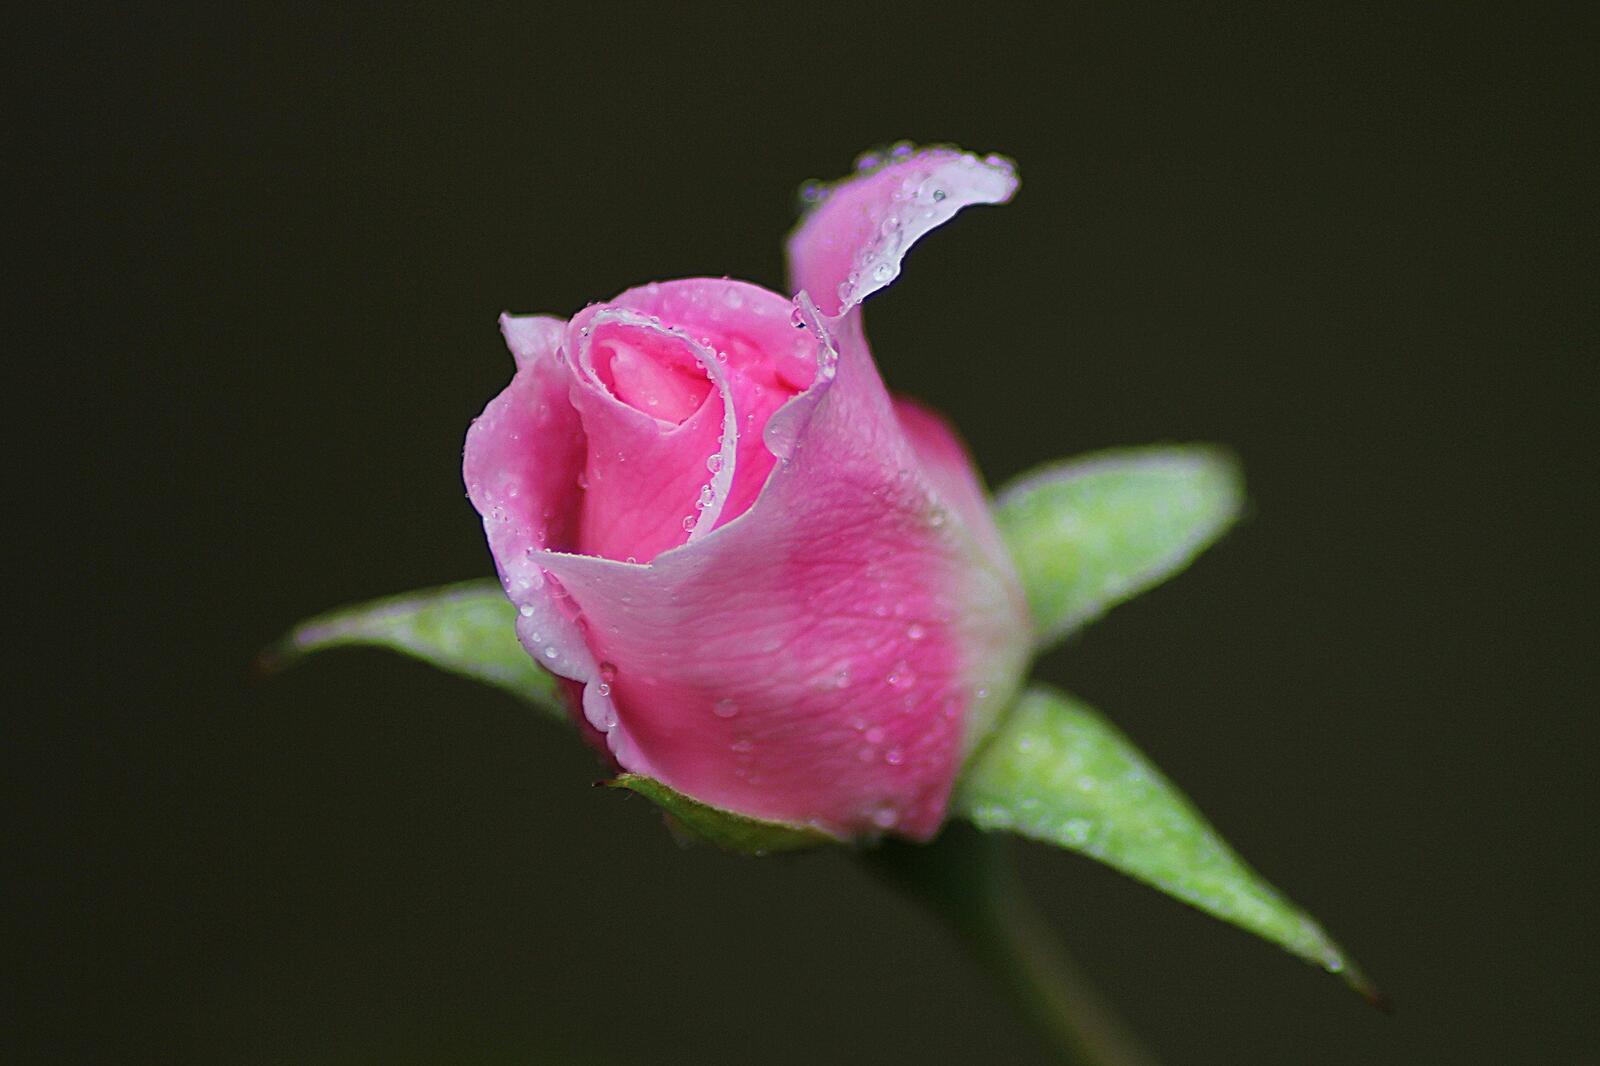 Free photo A groovy pink rose with dewdrops on the petals.